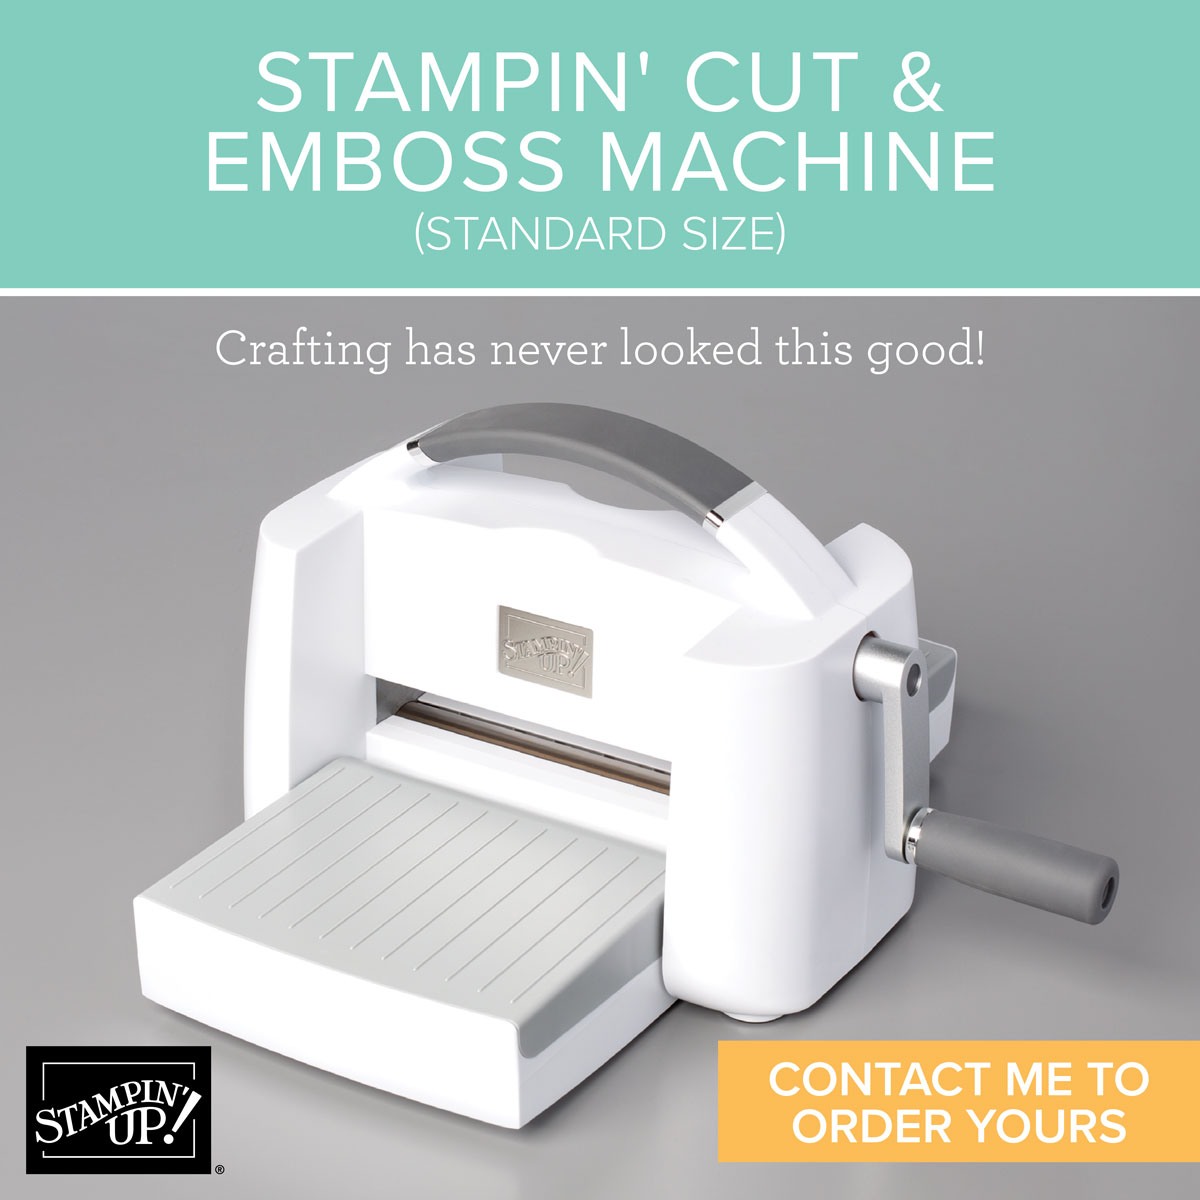 New Cut and Emboss MAchine available to order today! September 1, 2020 - Details on my blog here: https://wp.me/p59VWq-bri